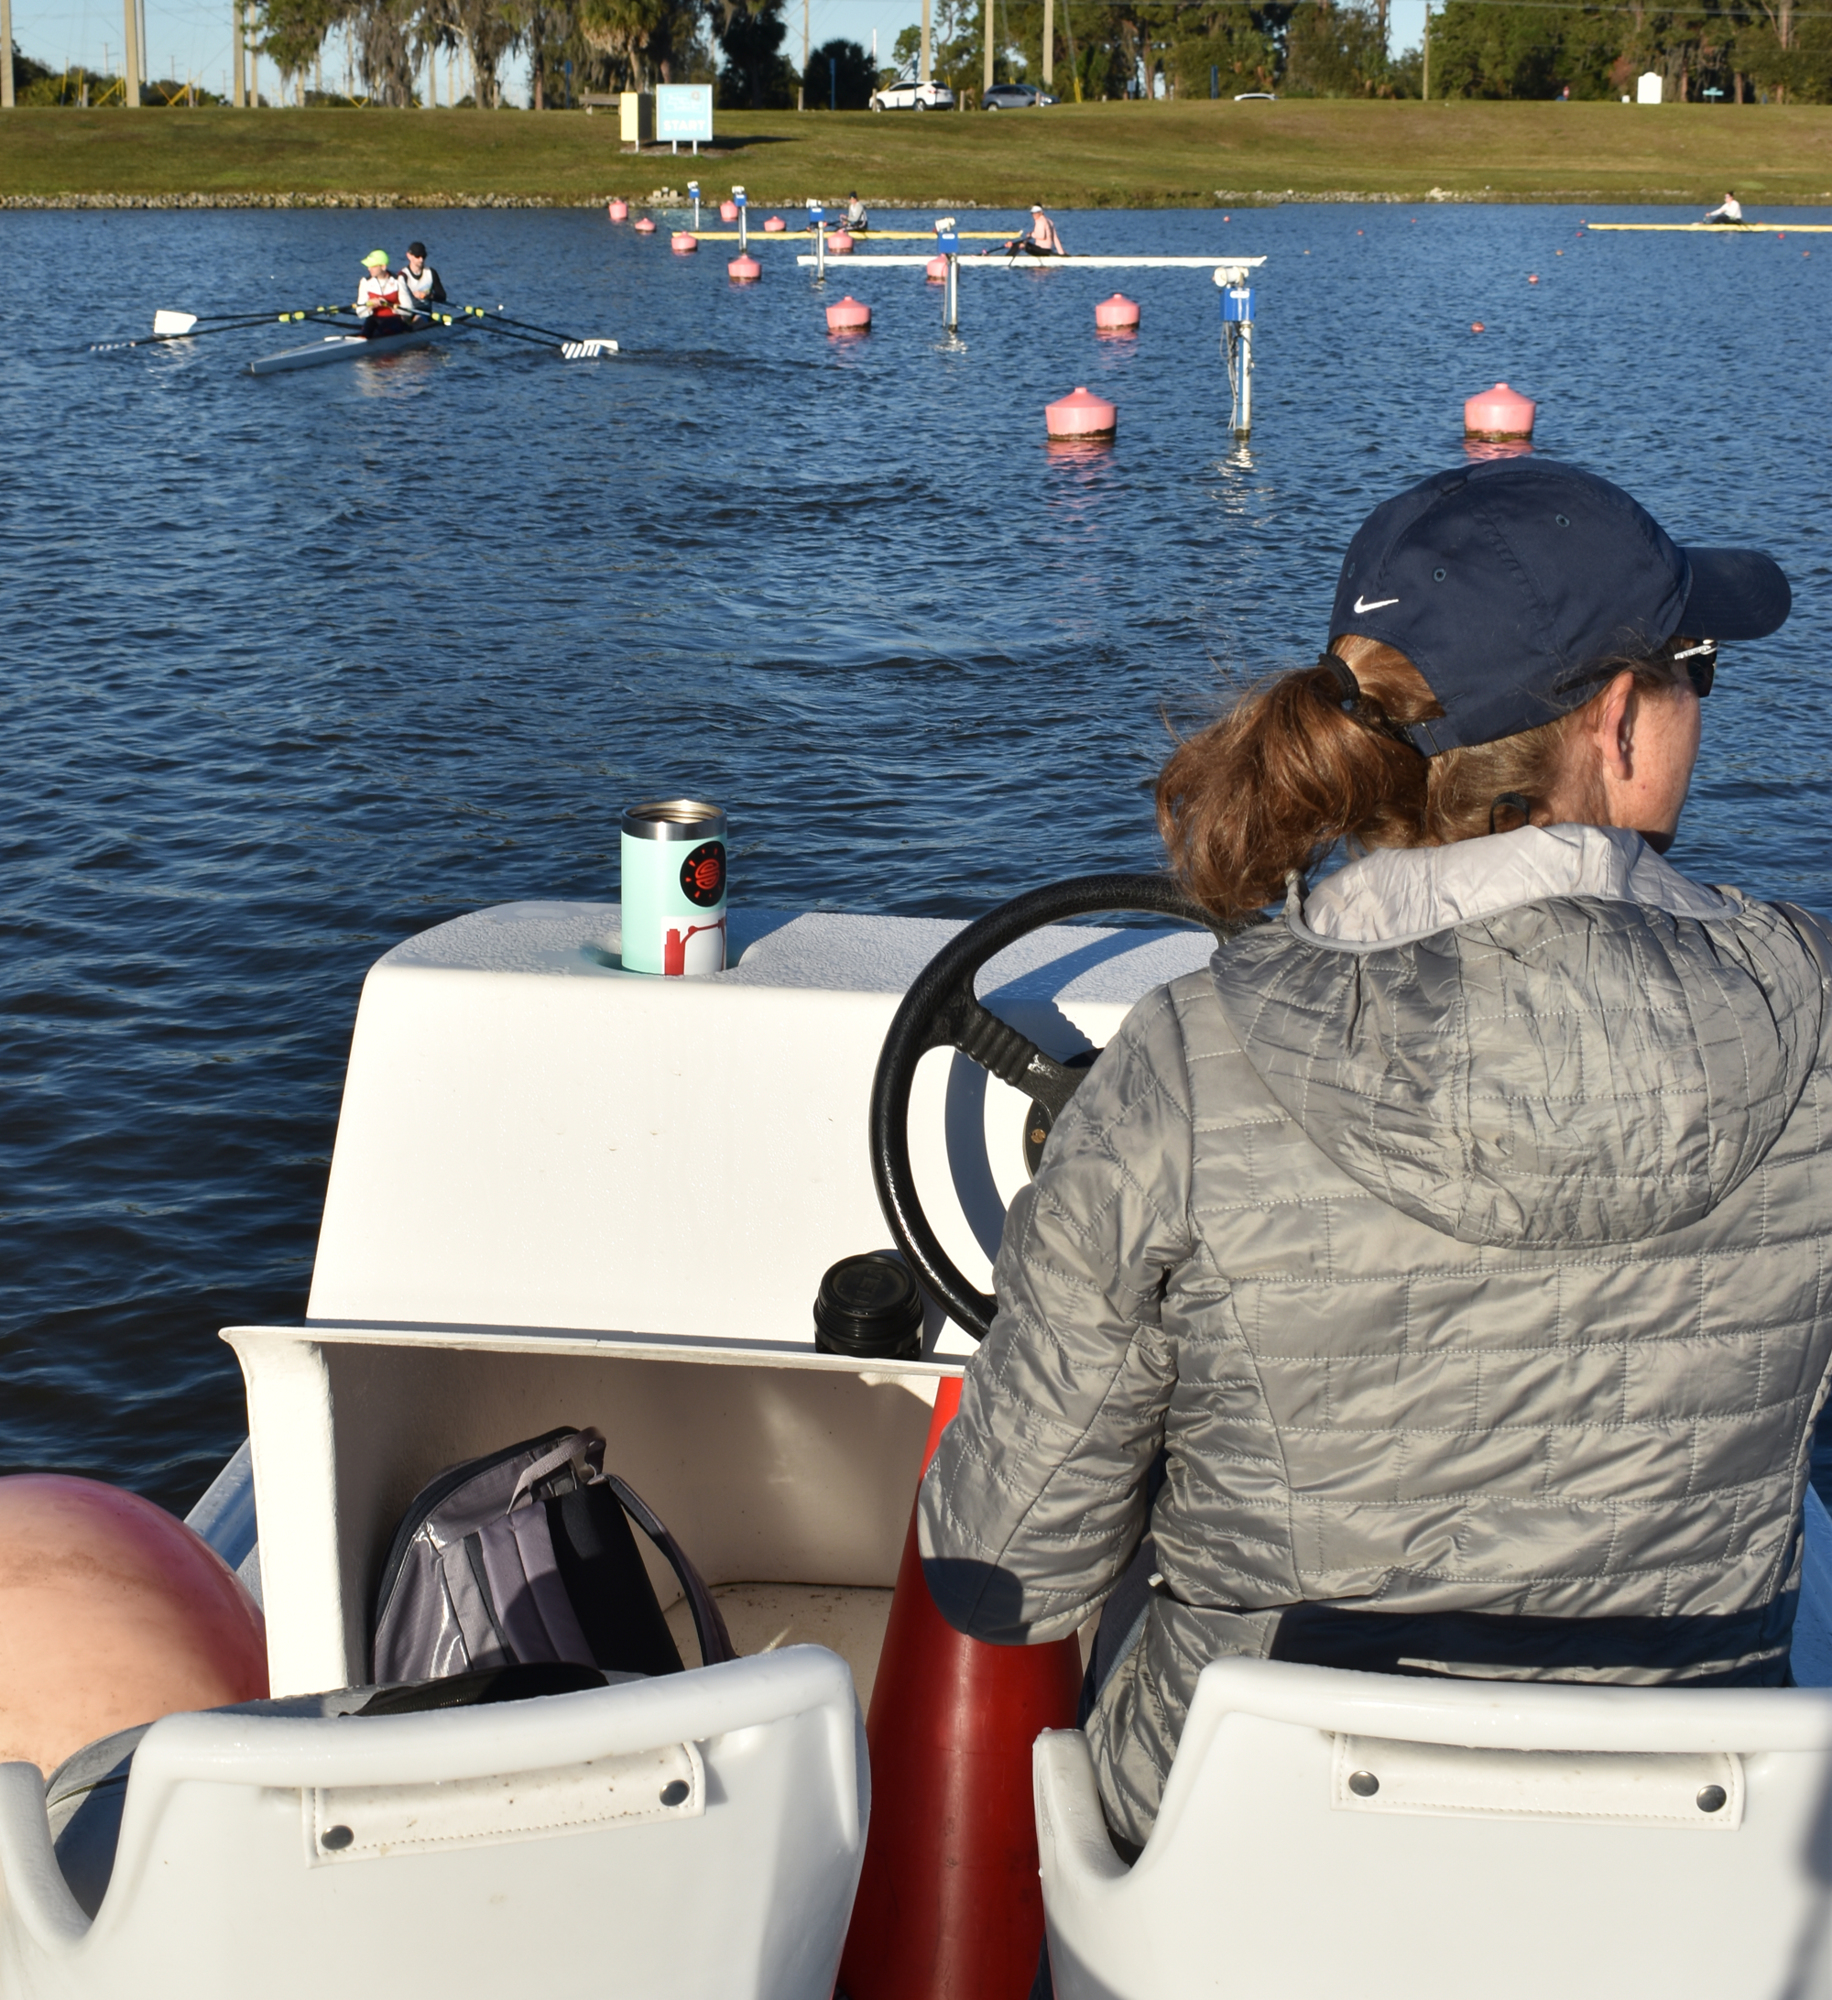 USRowing assistant coach Hilary Gehman works with Olympic hopefuls for the quad rowing team. Excluding athletes who are training for the Olympics, few rowers are coming to Nathan Benderson Park this winter. (Courtesy of SANCA)